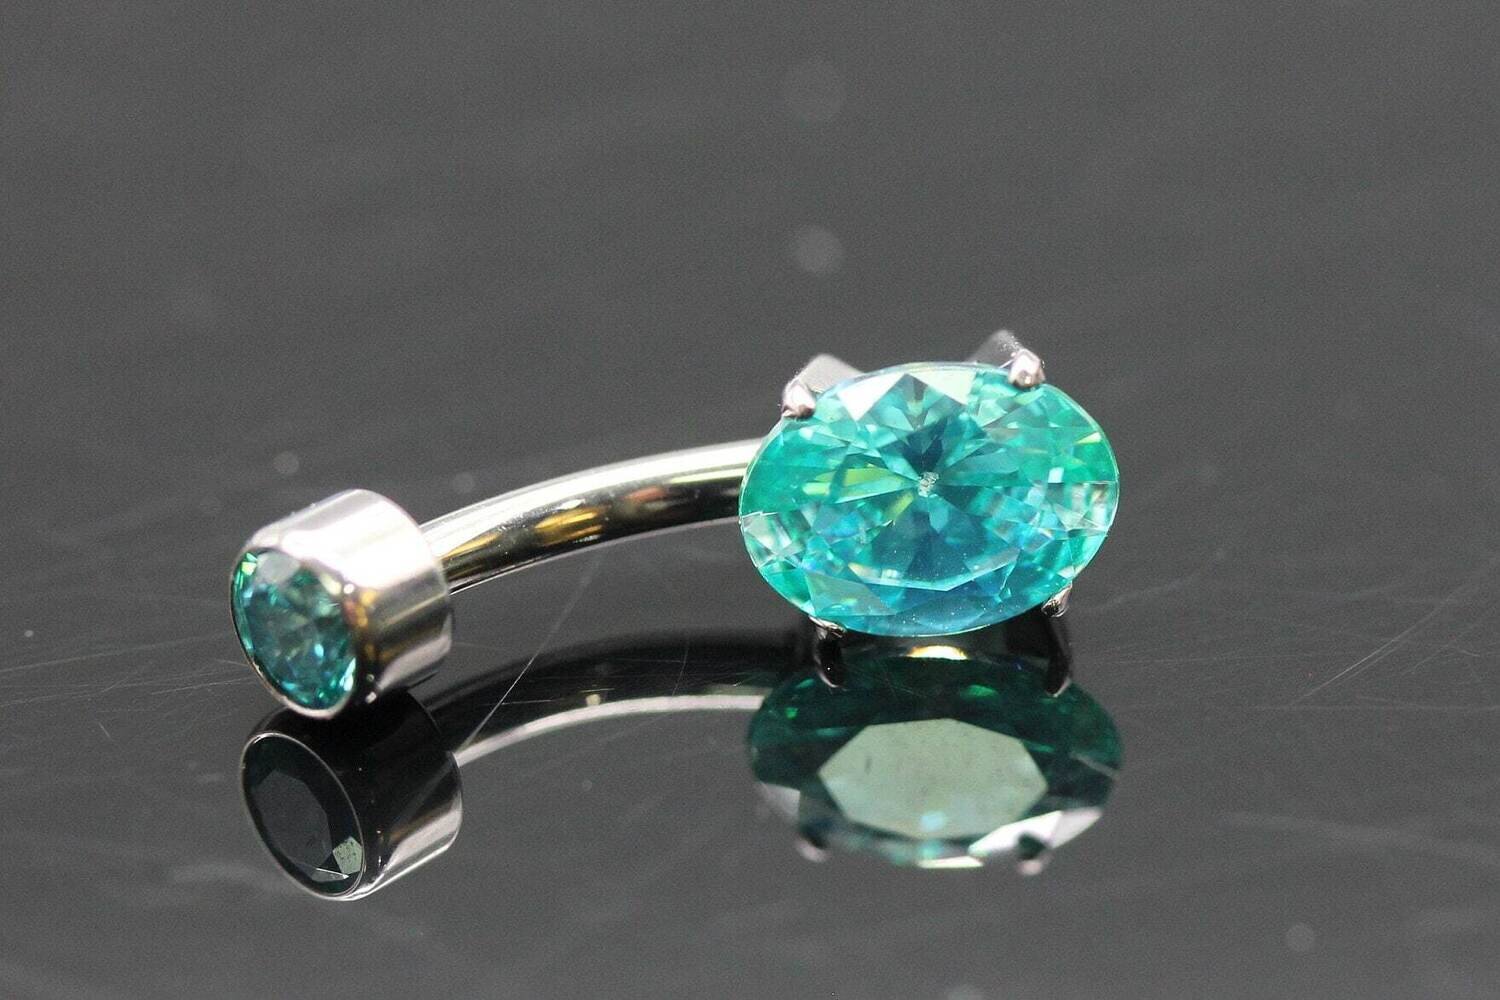 Anatometal Titanium Oval Navel Curve with Mint Green Stones 6x8mm bottom and 3mm top